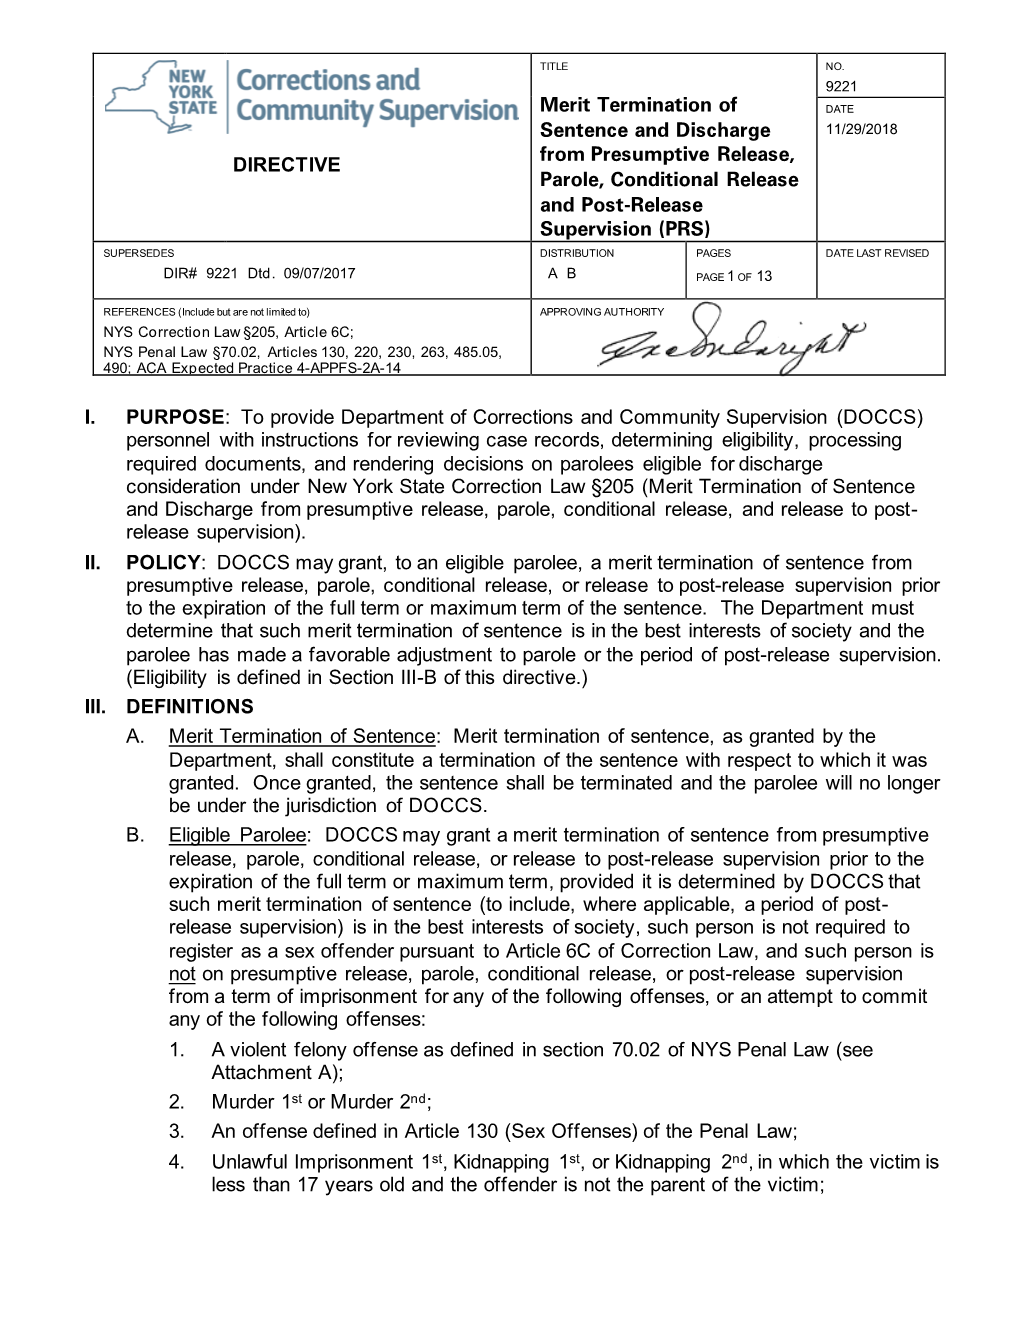 DIRECTIVE Merit Termination of Sentence and Discharge From